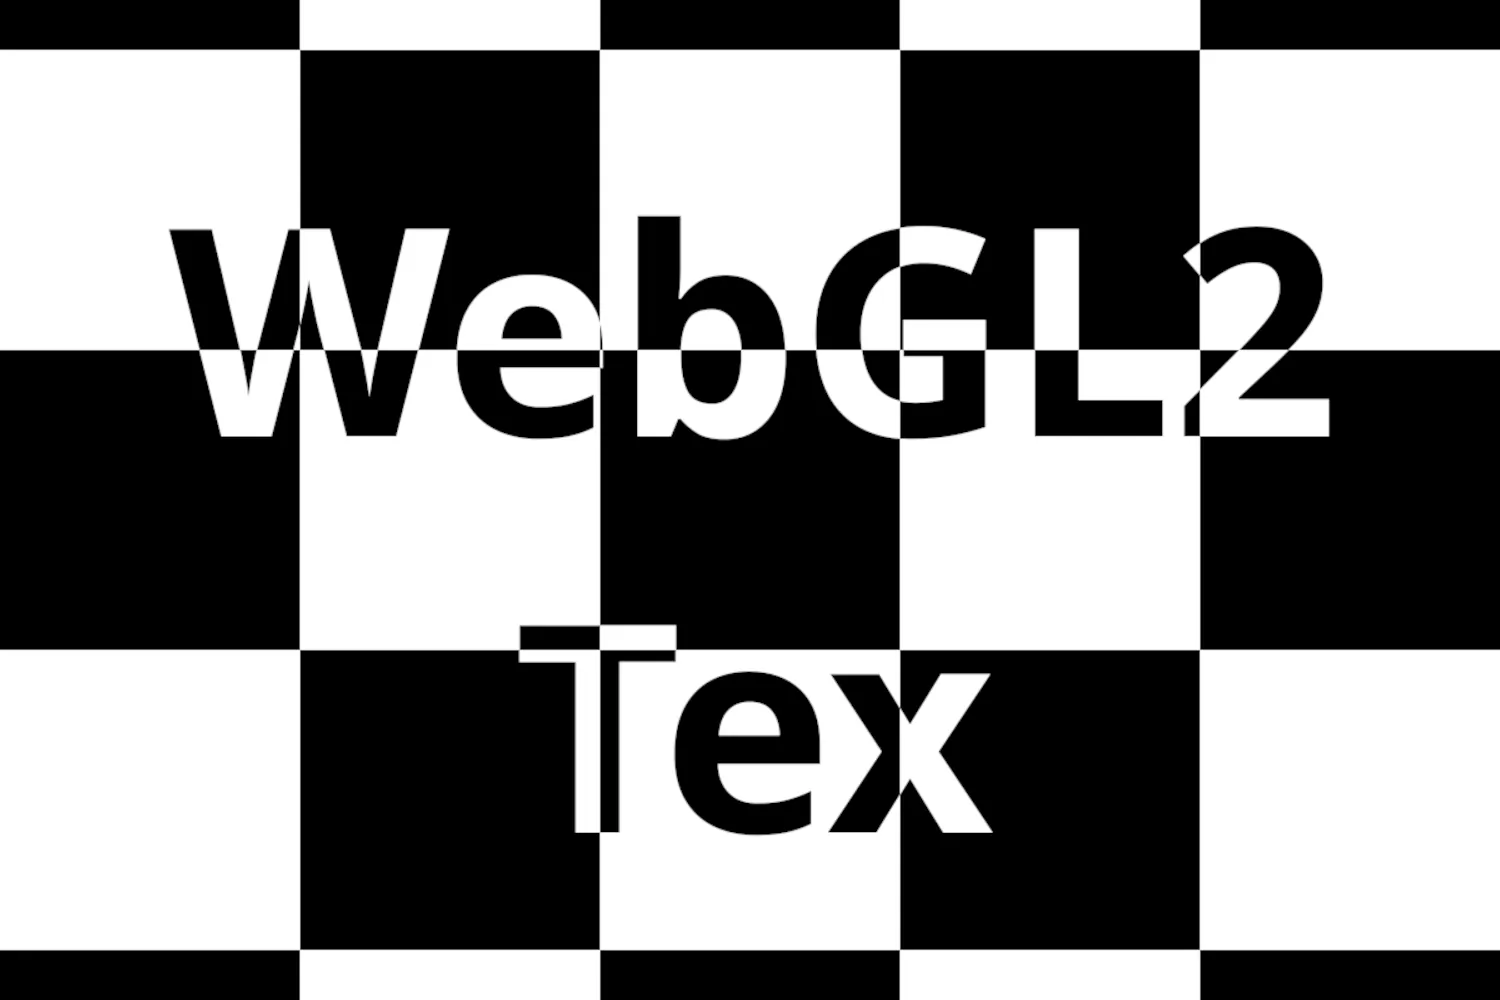 A checkboard pattern with the name WebGL2Tex in the center